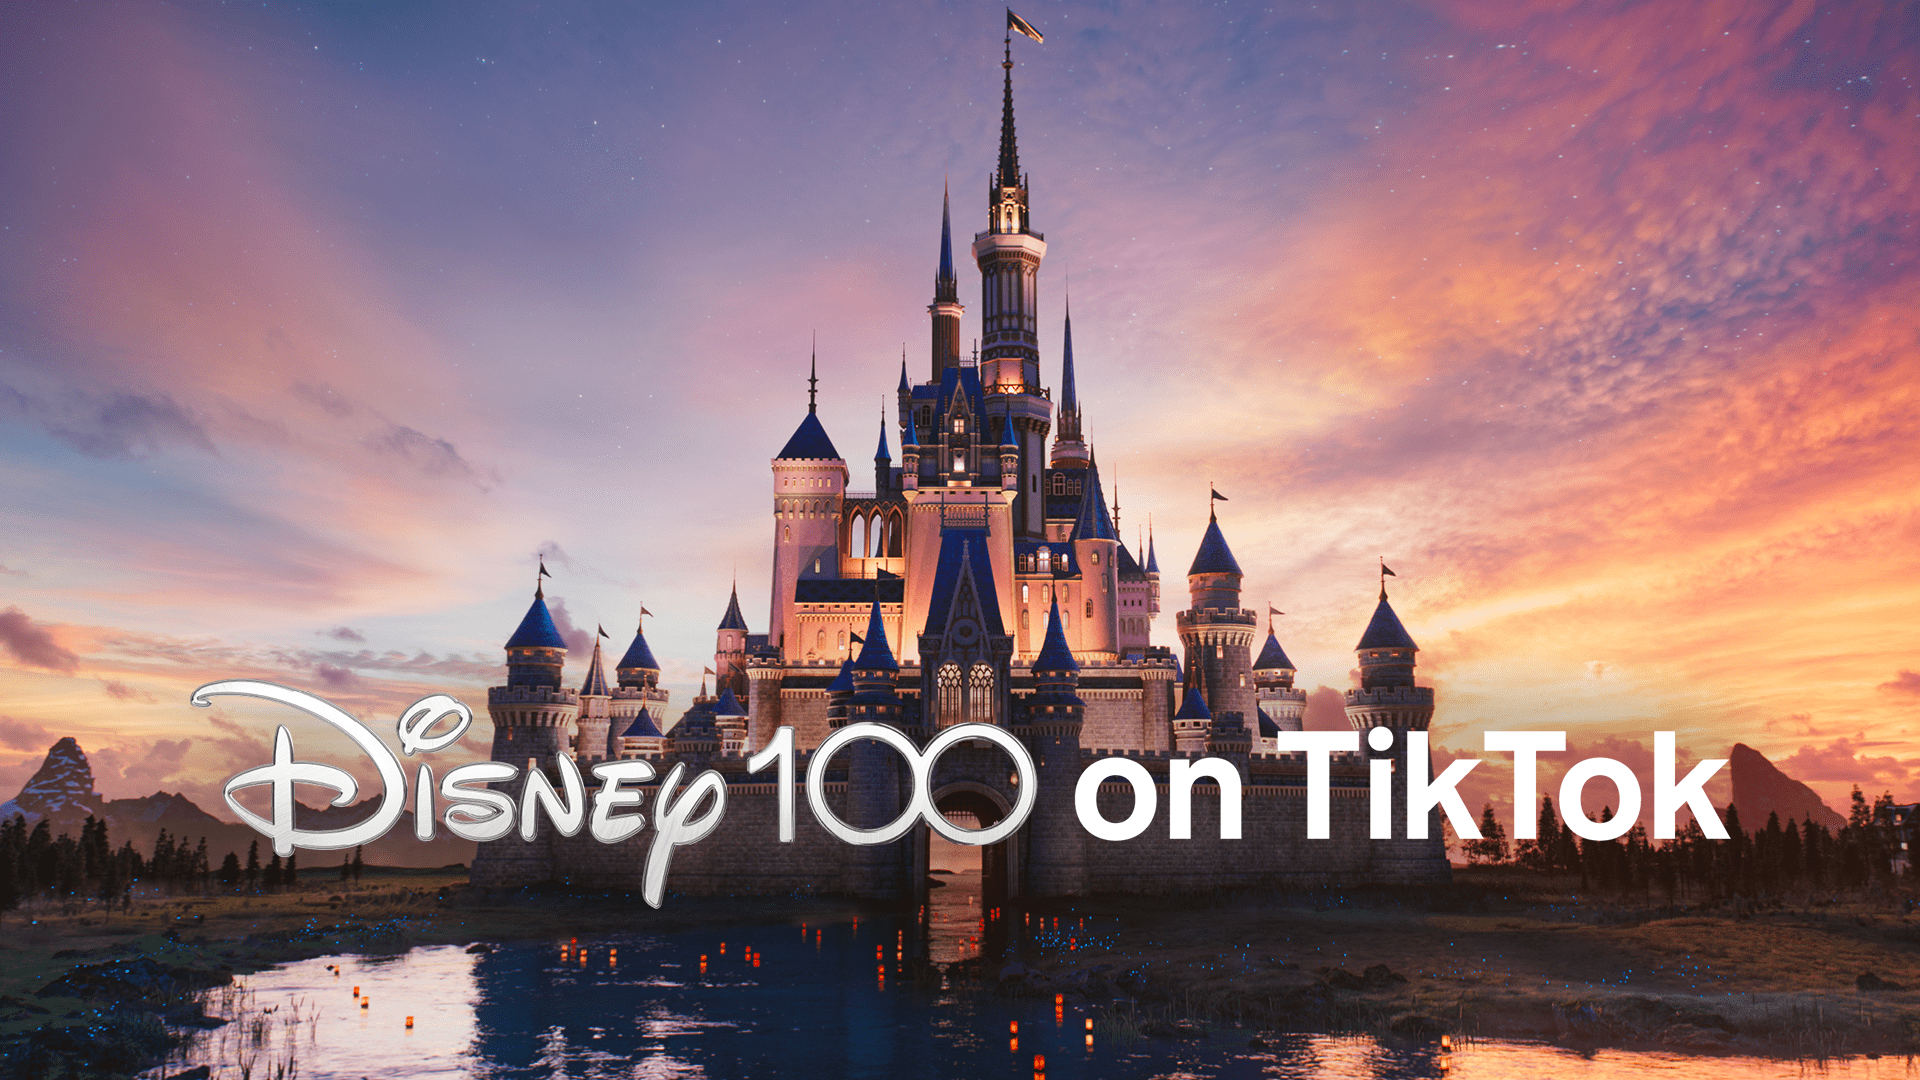 TikTok and Disney Begin Partnership With First-Of-Its-Kind Content Hub  Celebrating 100 Years of The Walt Disney Company